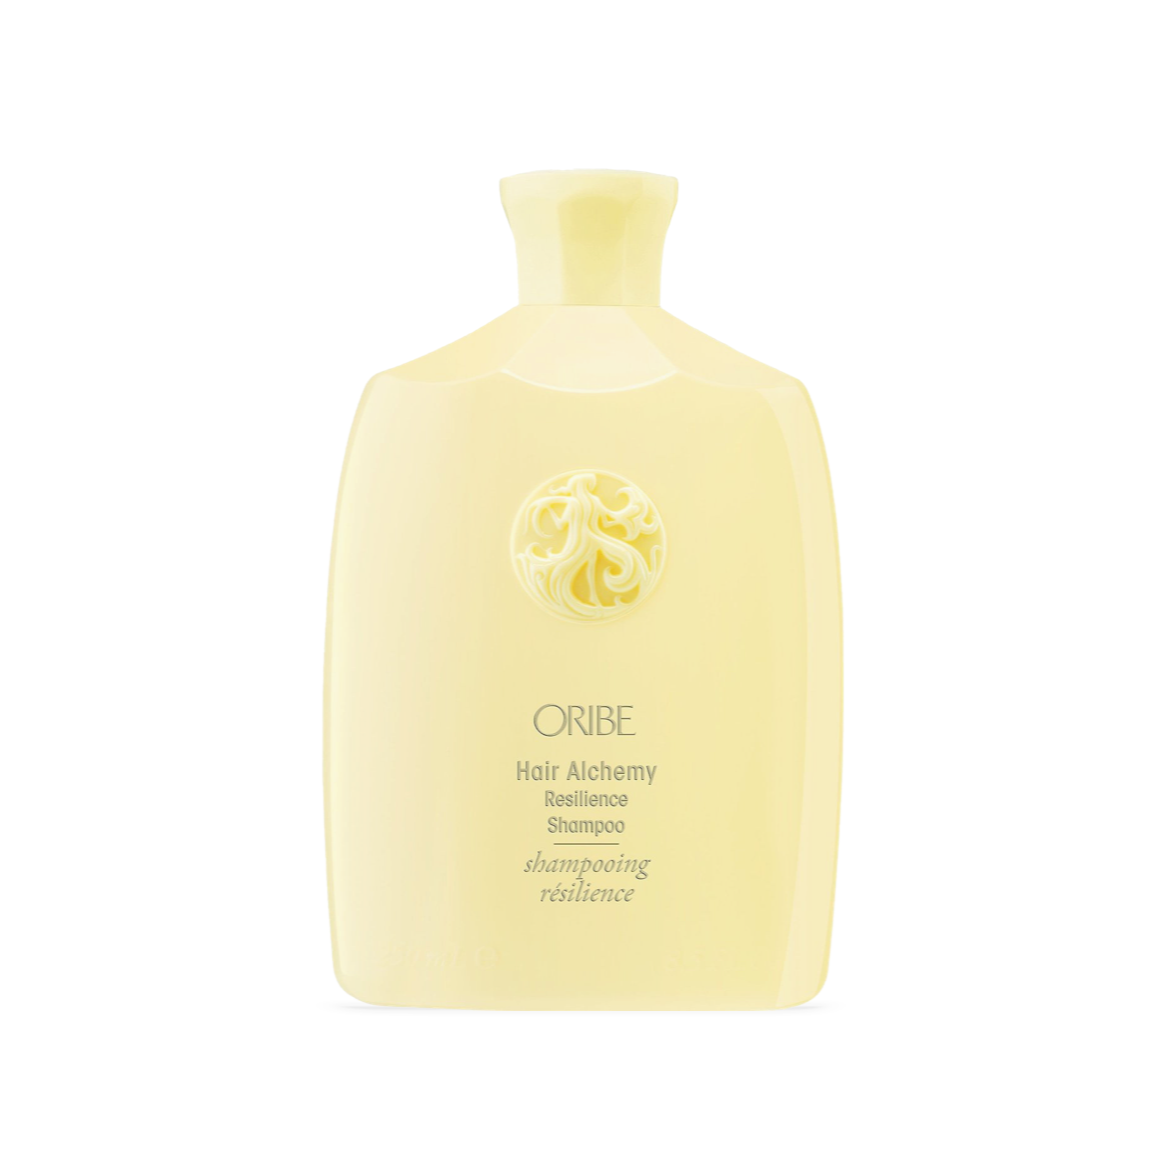 Oribe Hair Alchemy Resilience Shampoo bottle, a luxurious yellow-toned haircare product with the distinctive Oribe logo, designed to strengthen and hydrate weak hair.